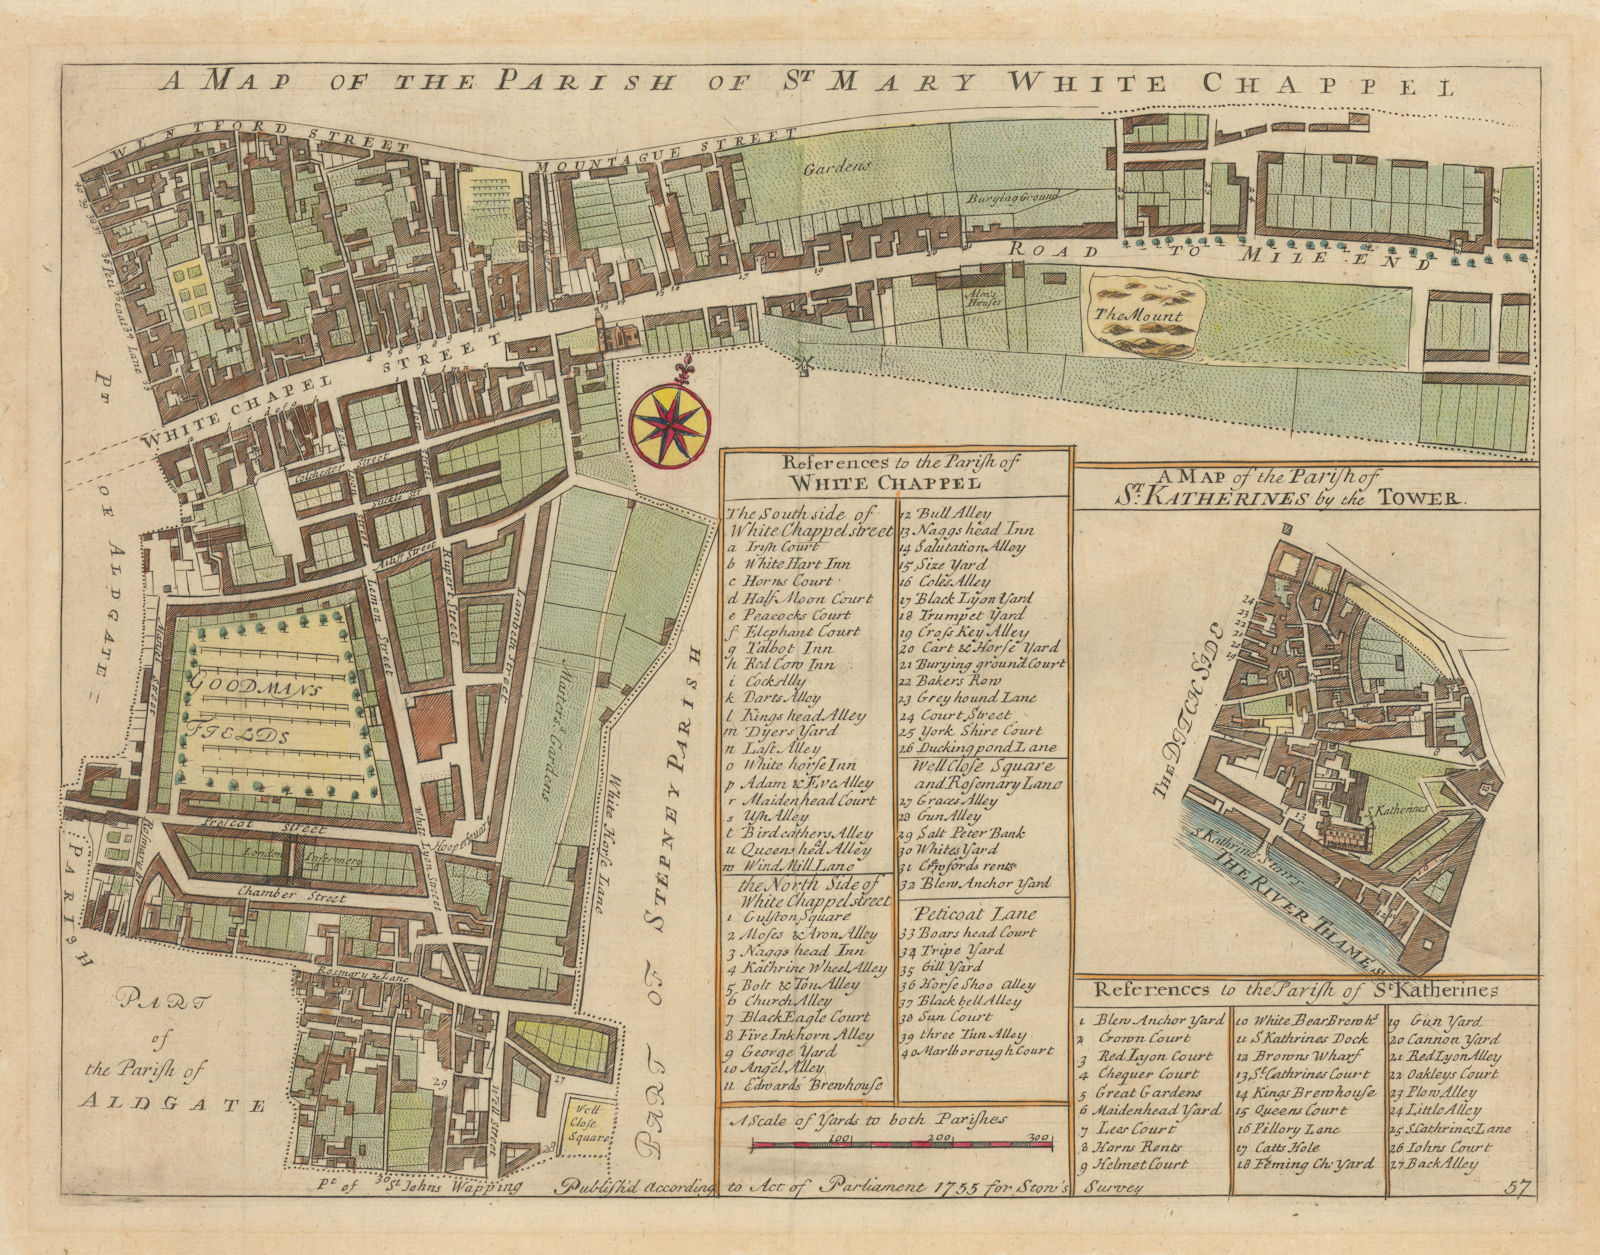 Associate Product Parishes of St Mary, Whitechapel & St Katherine's/Tower. STOW/STRYPE 1755 map